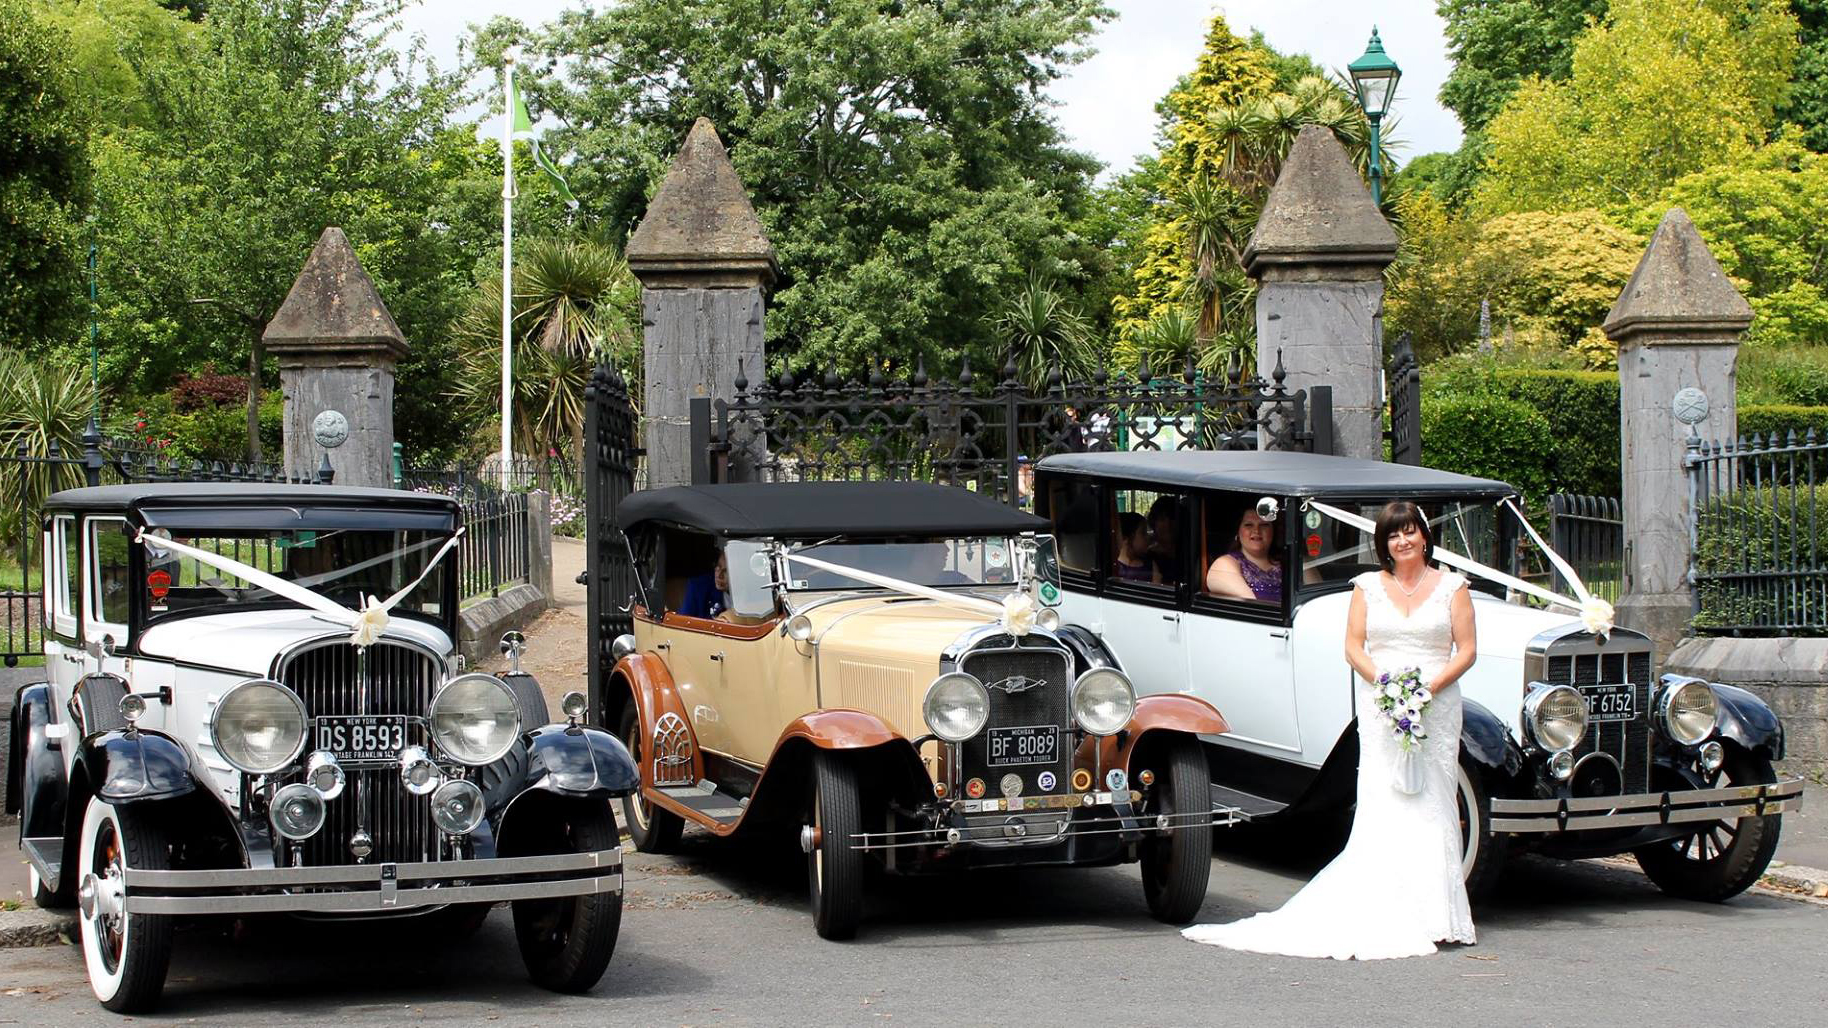 Three vintage wedding cars decorated with white ribbons at a local Paignton wedding. All three vehicles are parked side-by-side with bride wearing a white dress holding a bridal bo